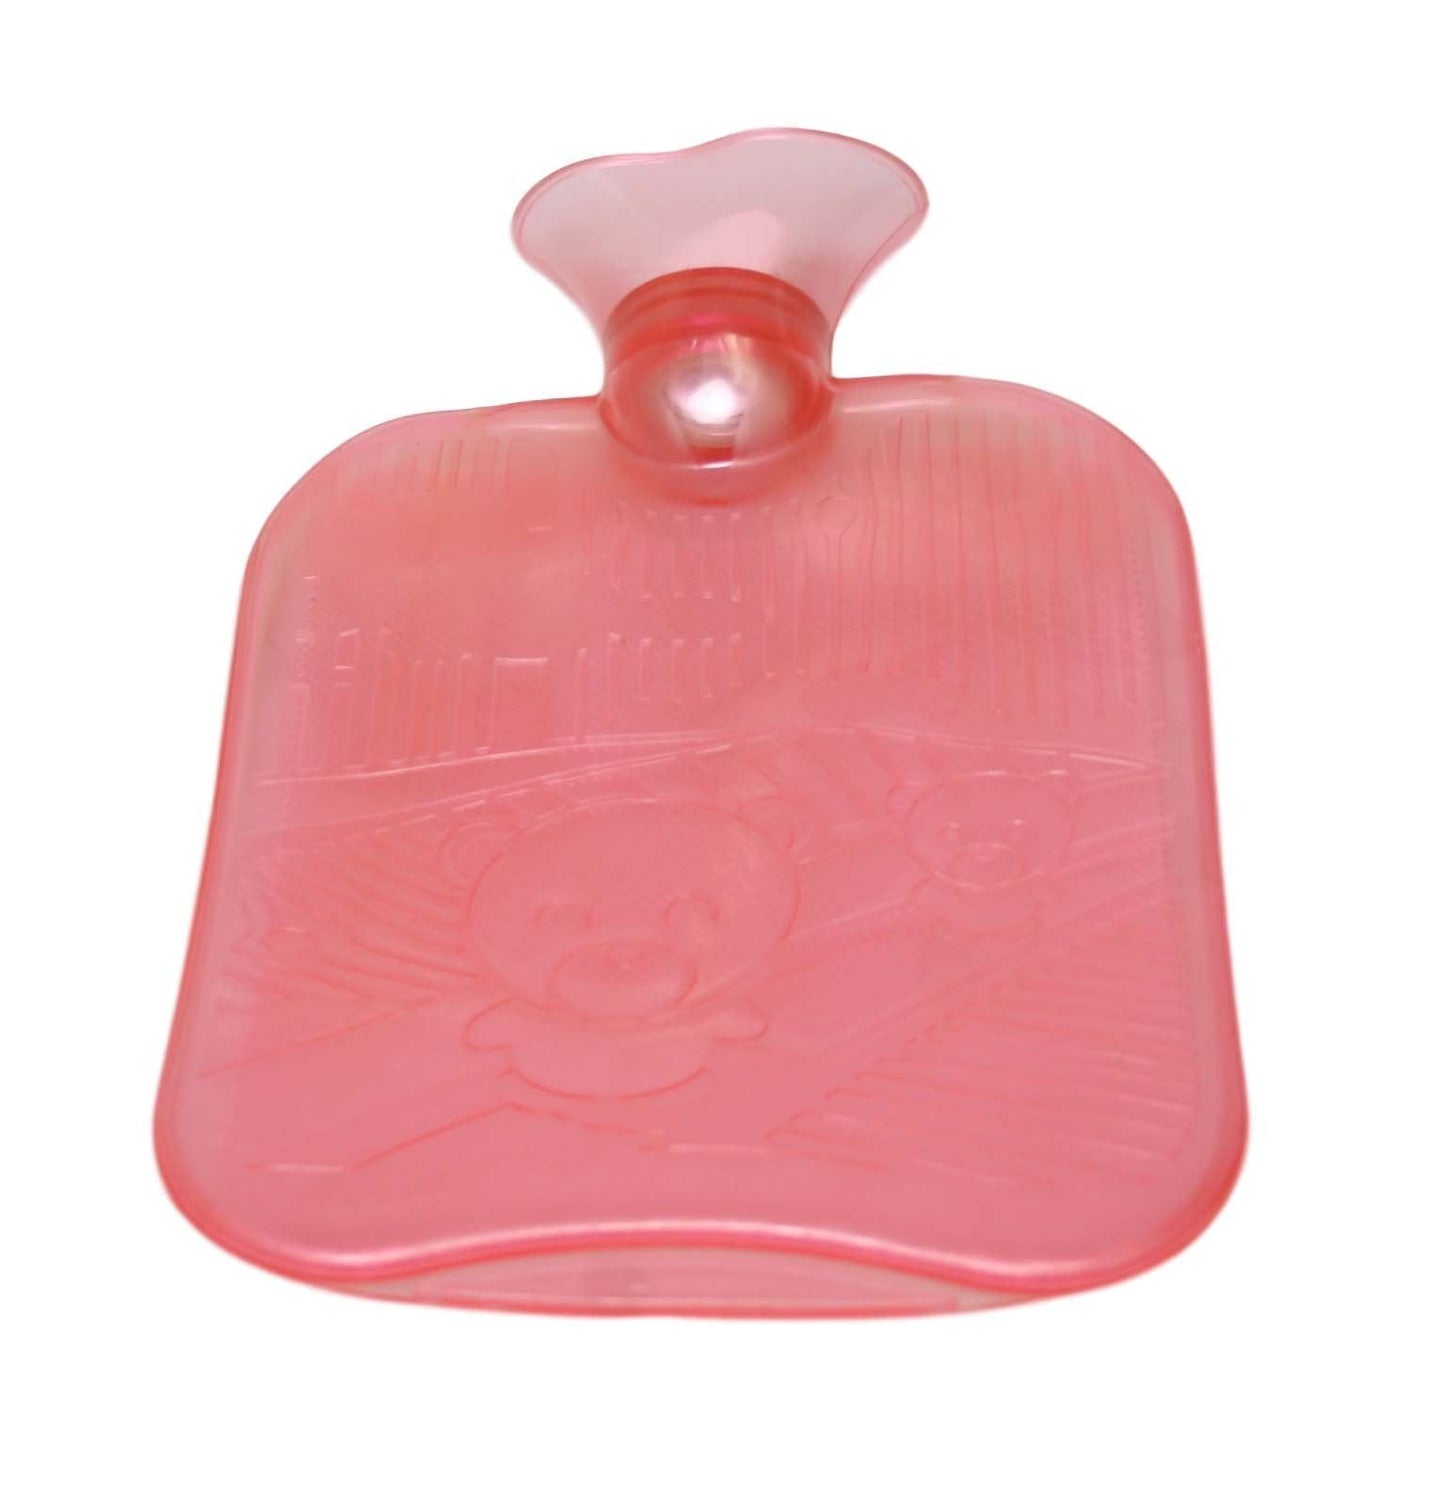 Clear Silicone Hot Water Bottle 1 Litre 18 x 20 cm Assorted Colours 6433 (Parcel Rate)